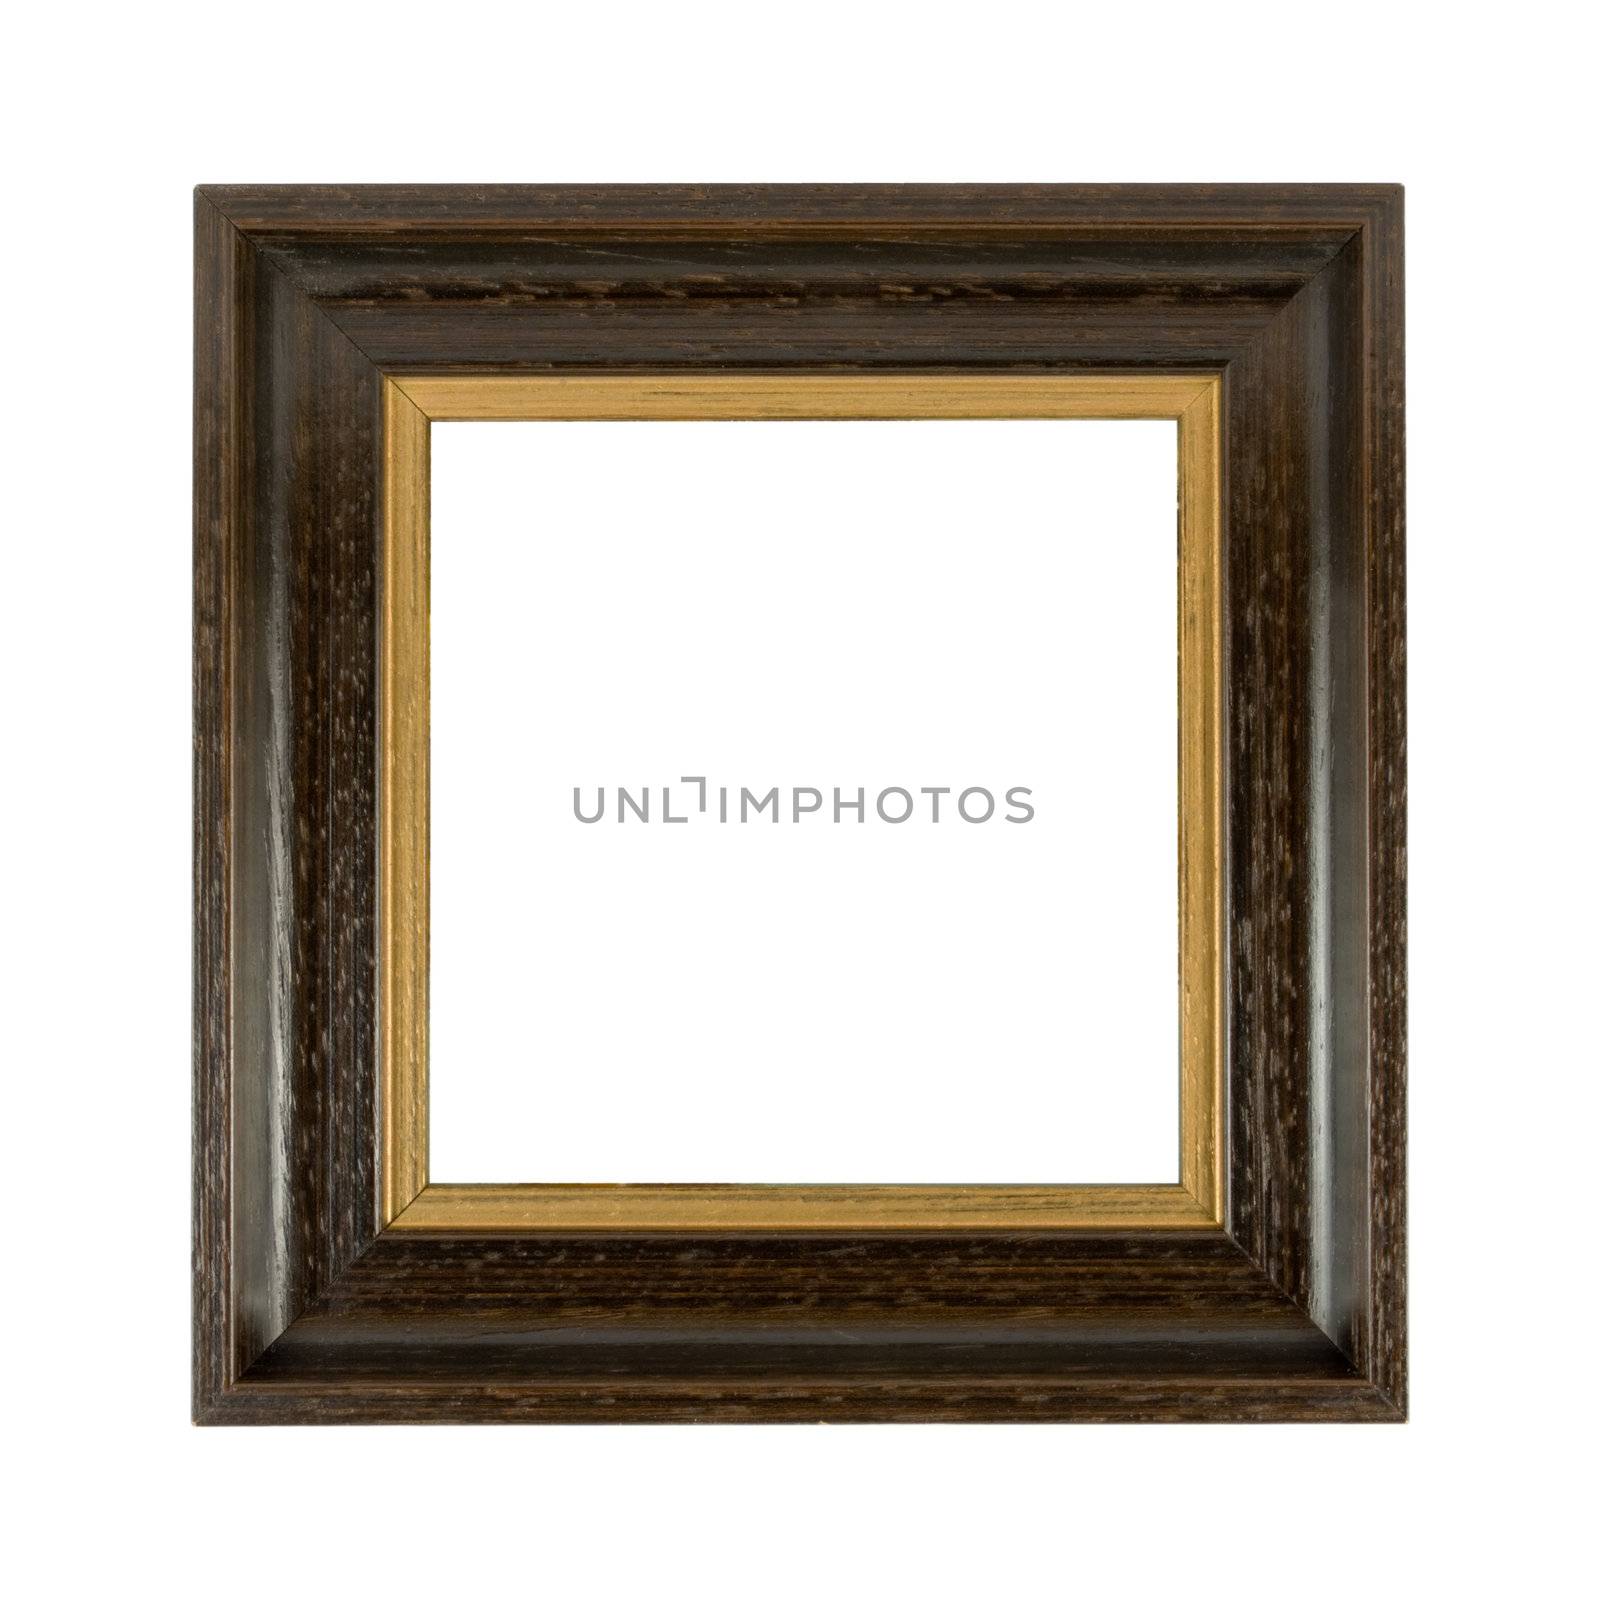 Old wooden photoframe isolated on a white background with copyspace